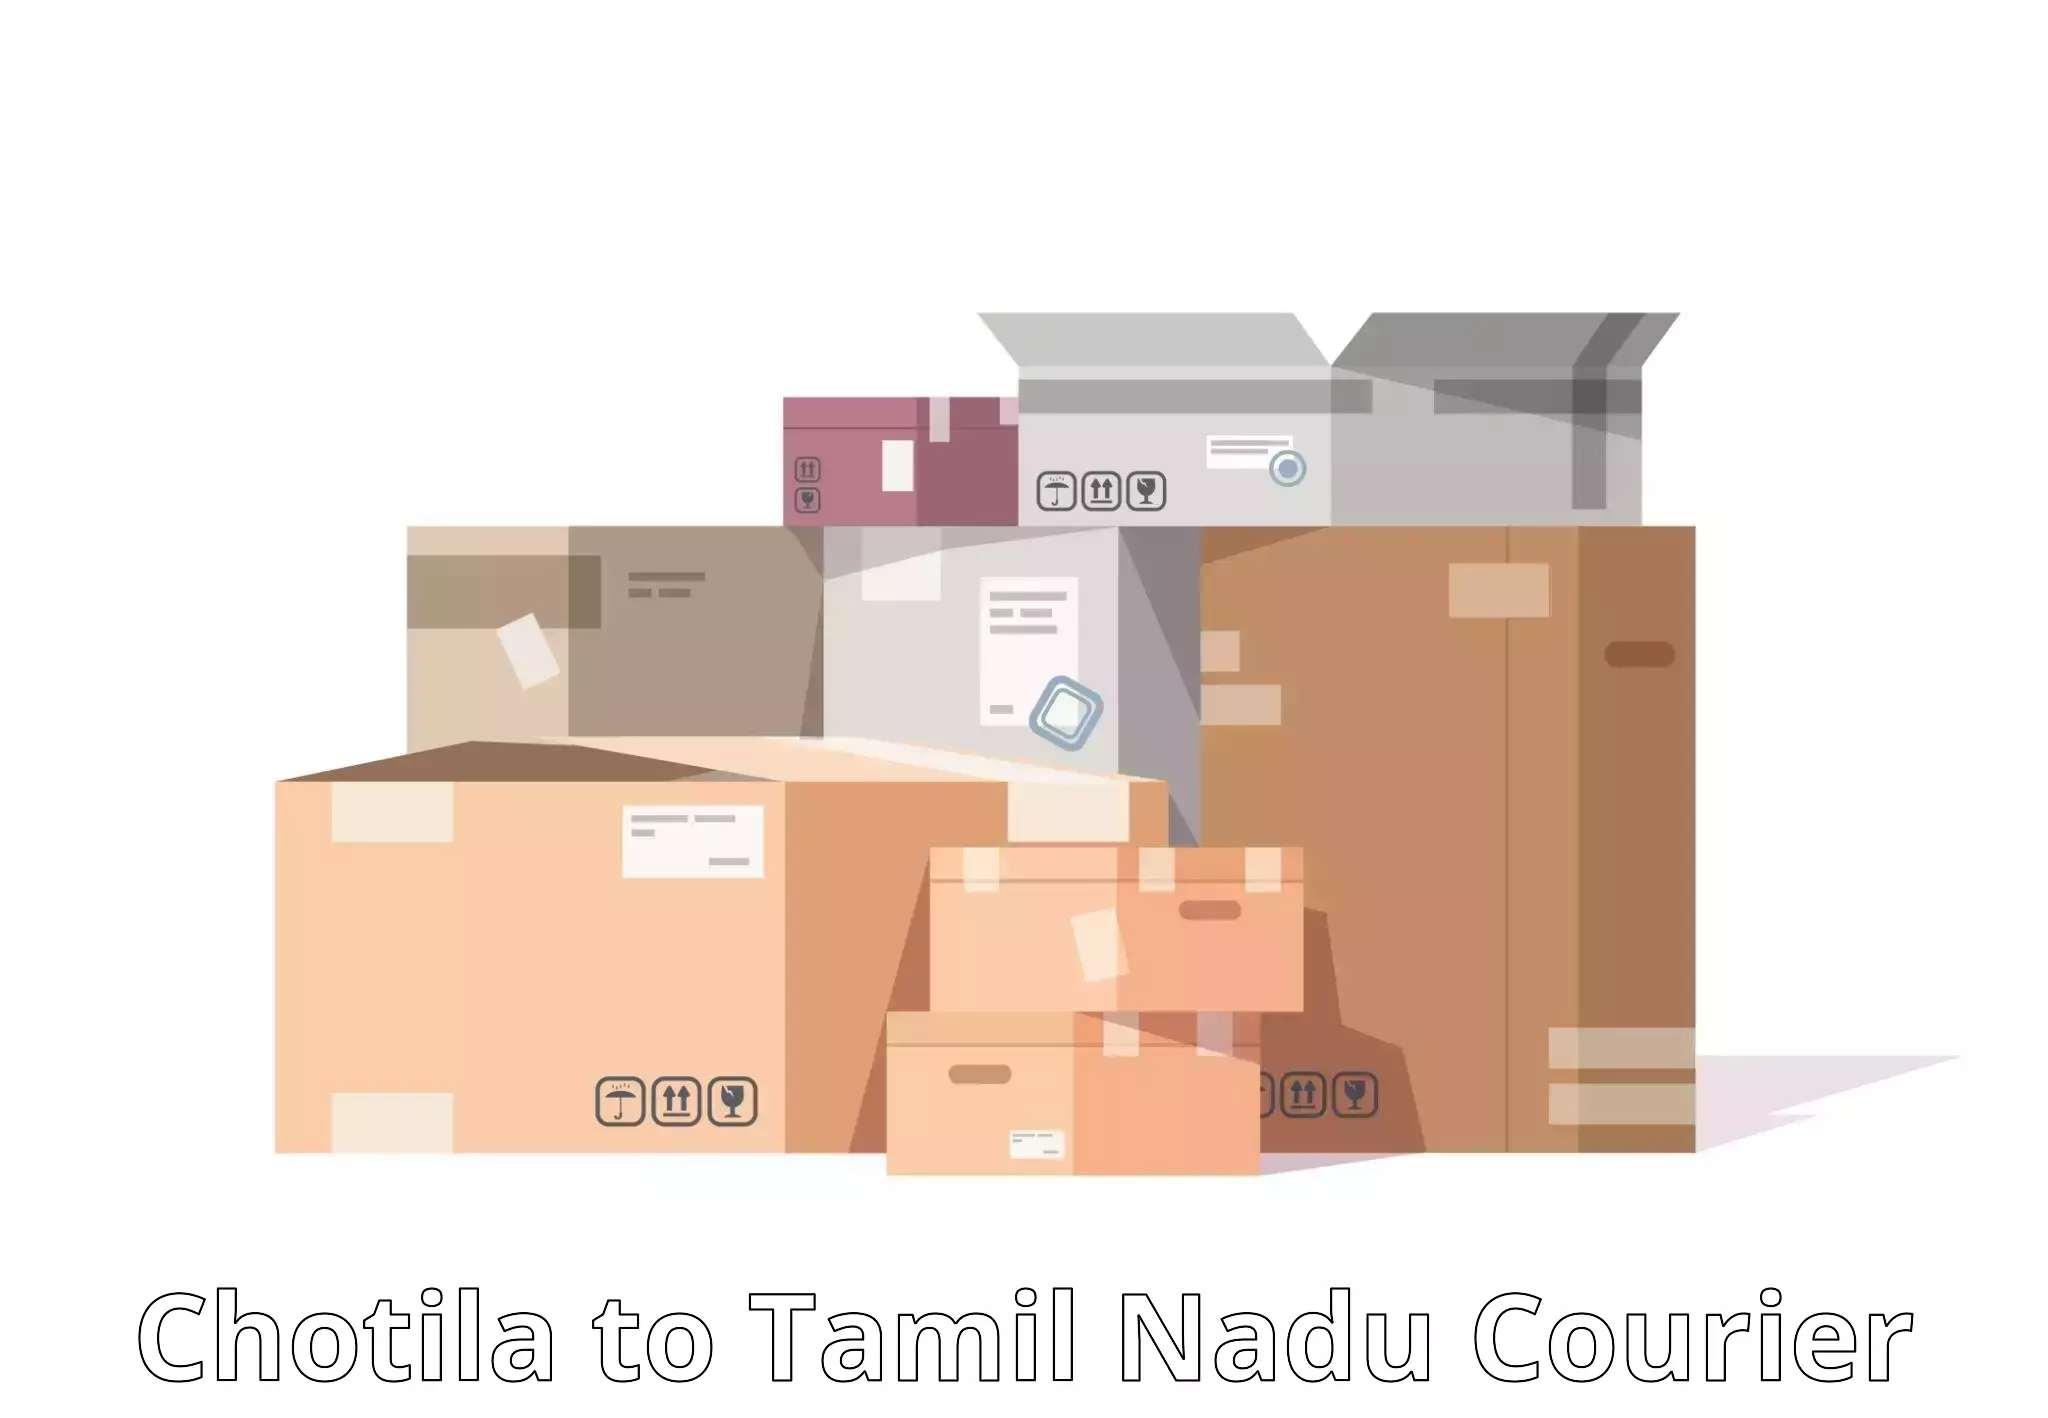 Efficient parcel tracking Chotila to Ennore Port Chennai